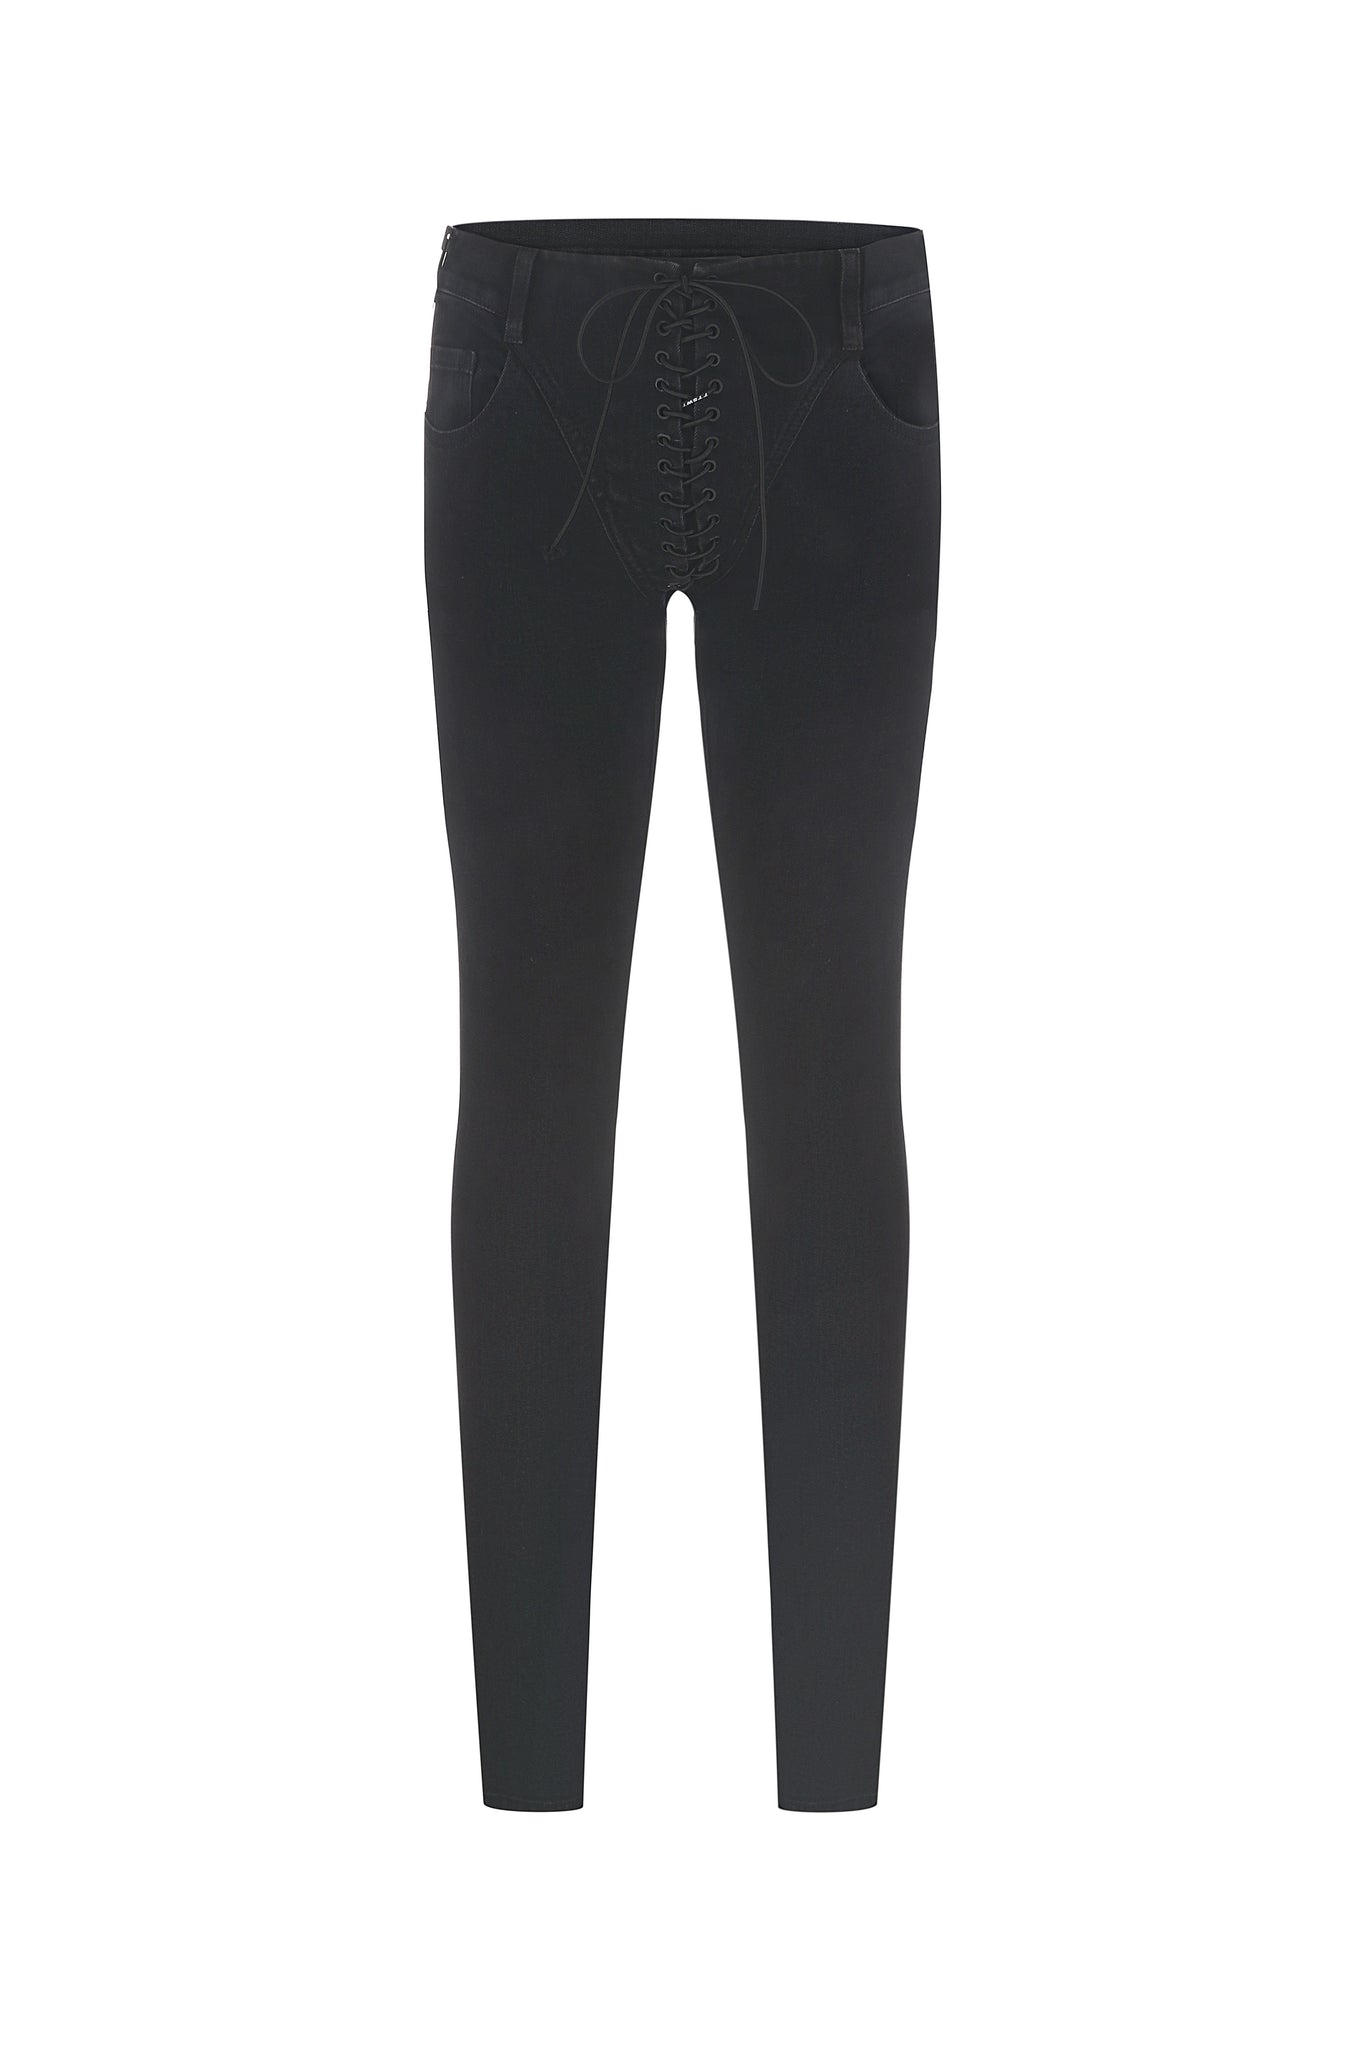 INLOVER Skinny Jeans